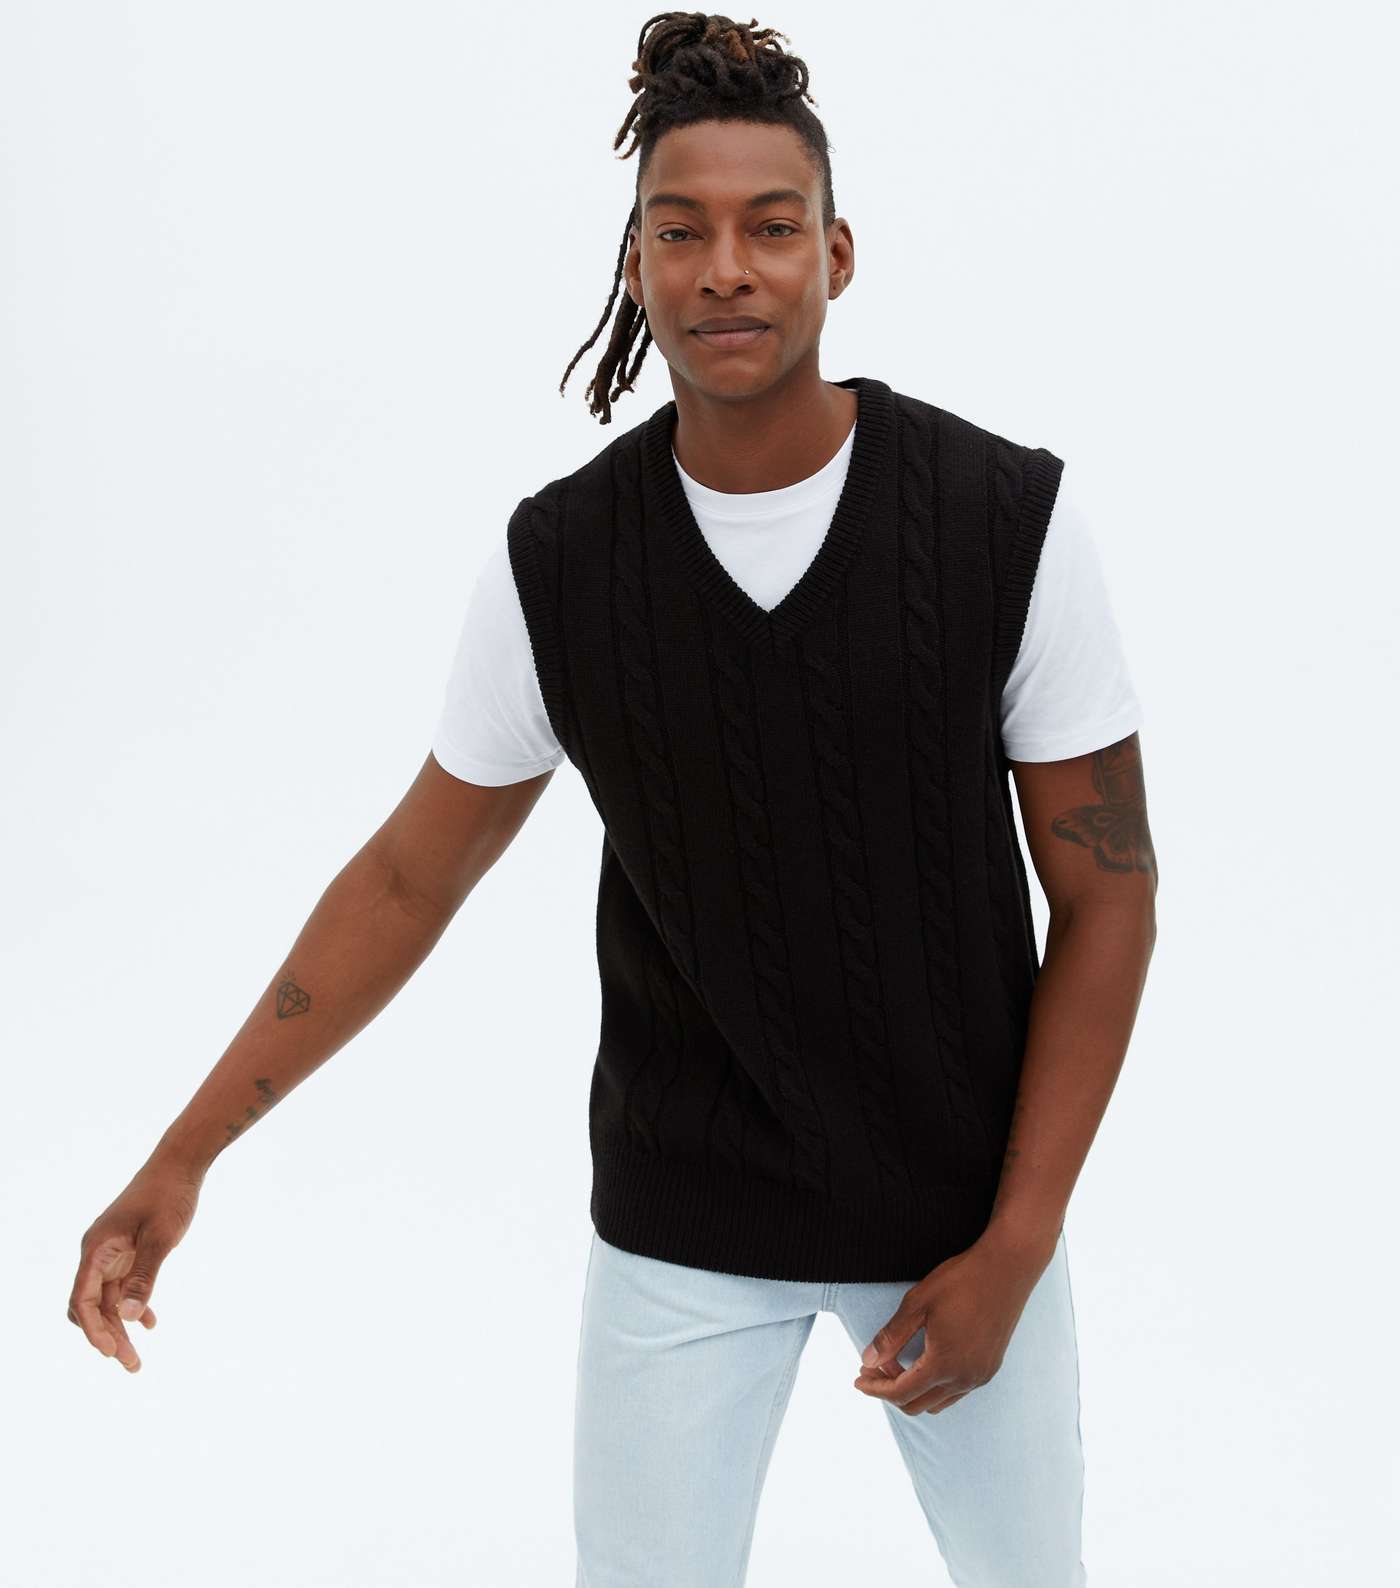 Black Cable Knit Relaxed Fit Vest Jumper